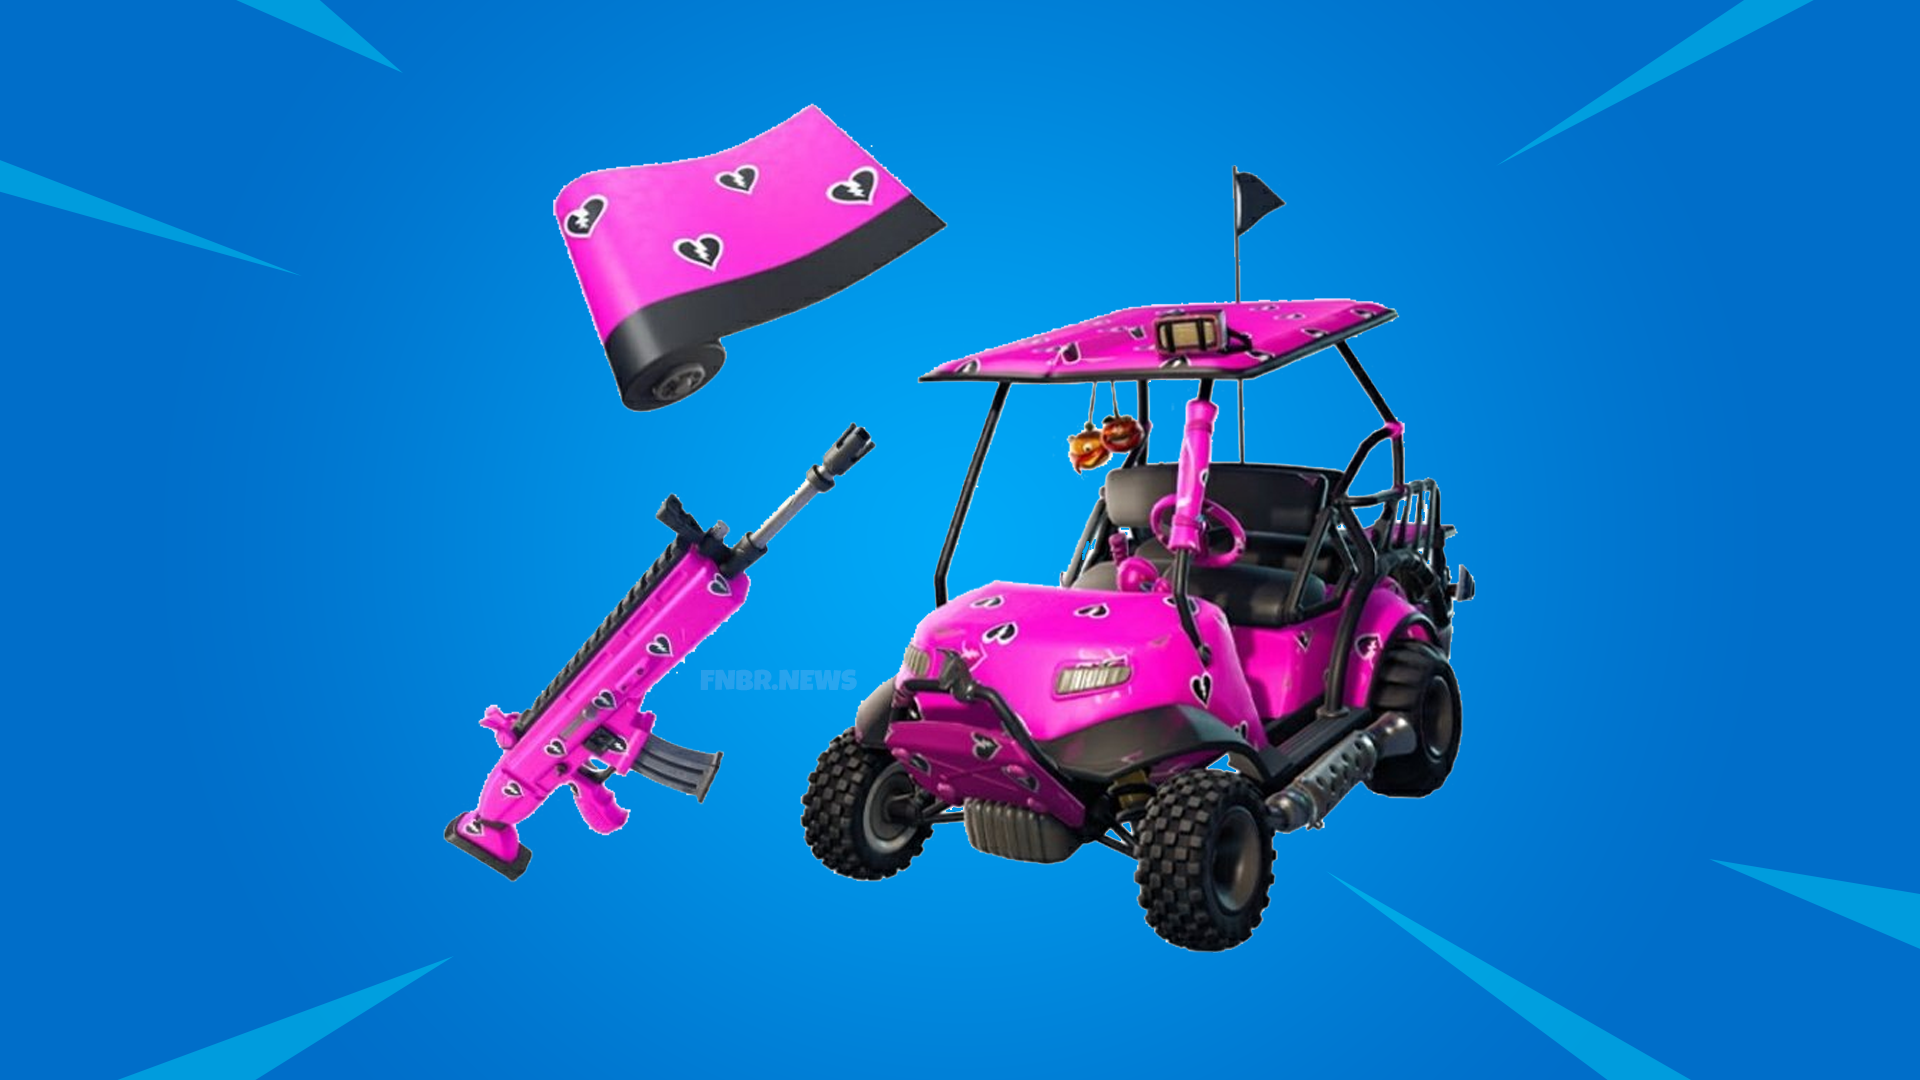 Get a Free Fortnite Wrap for Using Support-A-Creator Between February 8th-22nd